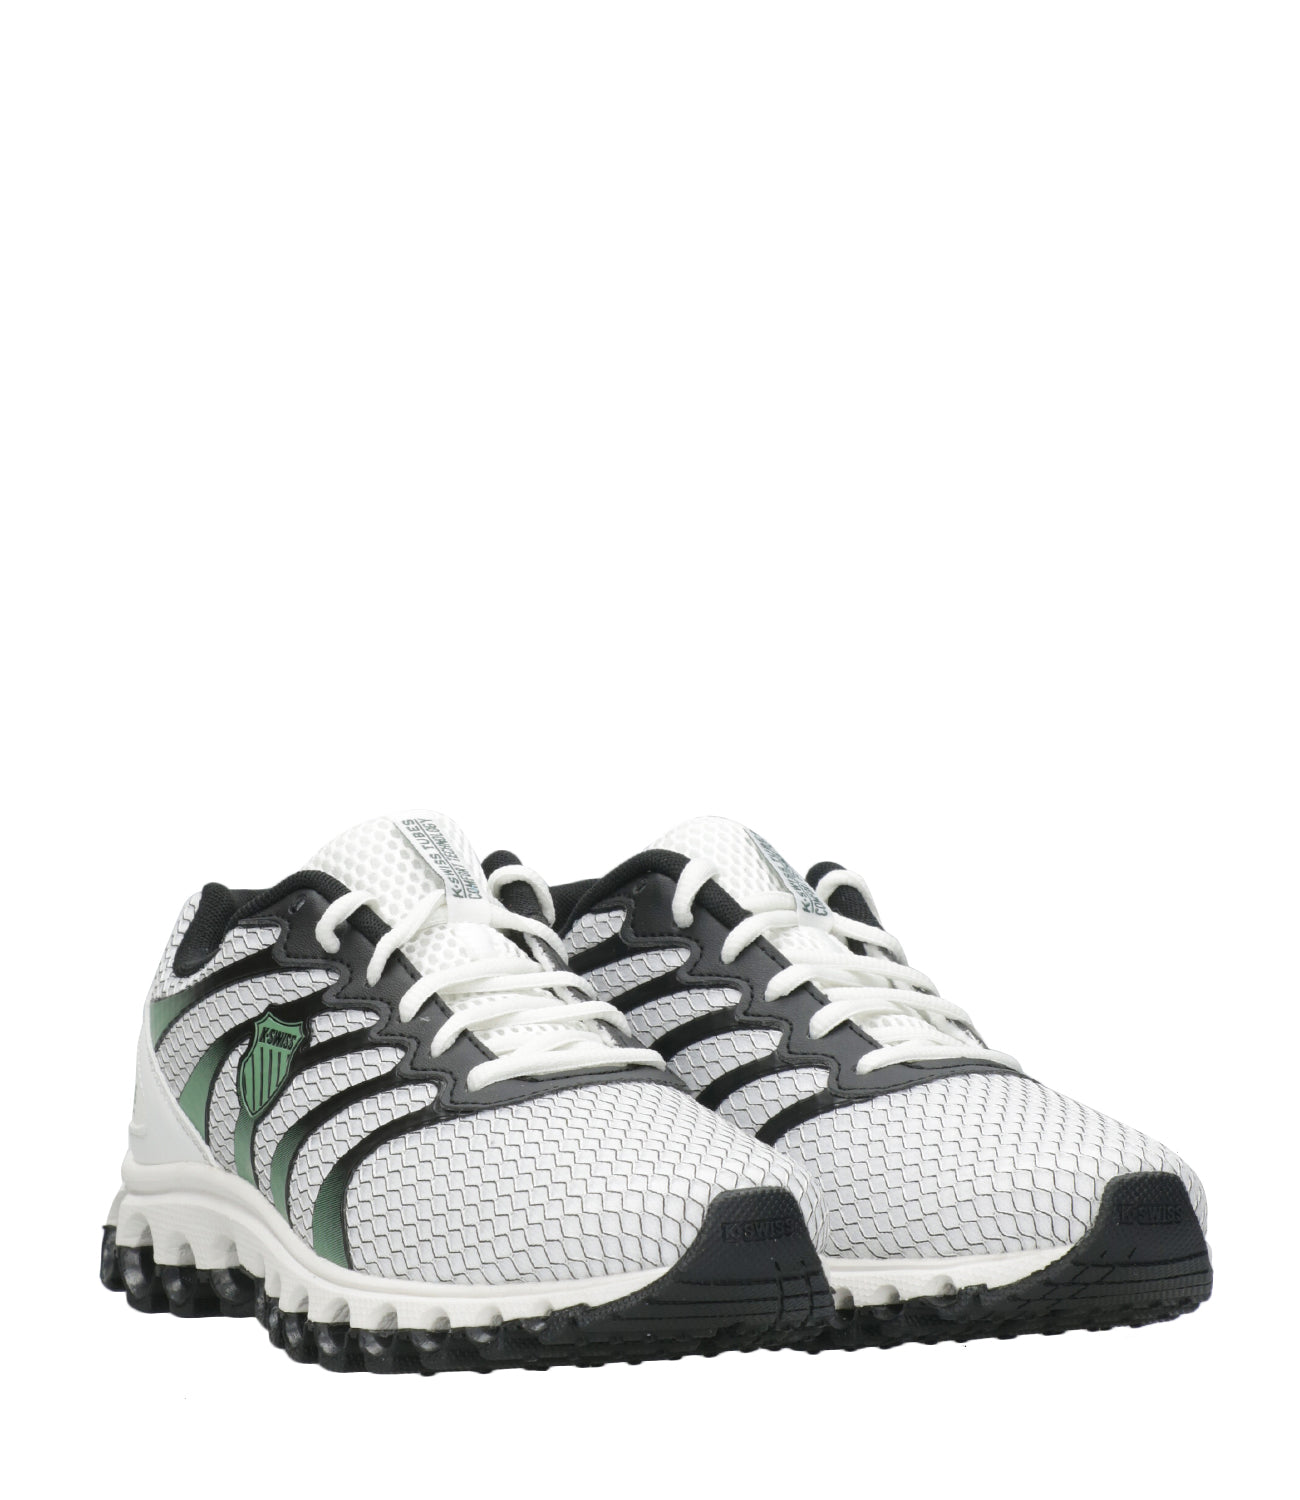 K-Swiss | Tubes 200 Sneakers White, Black and Green